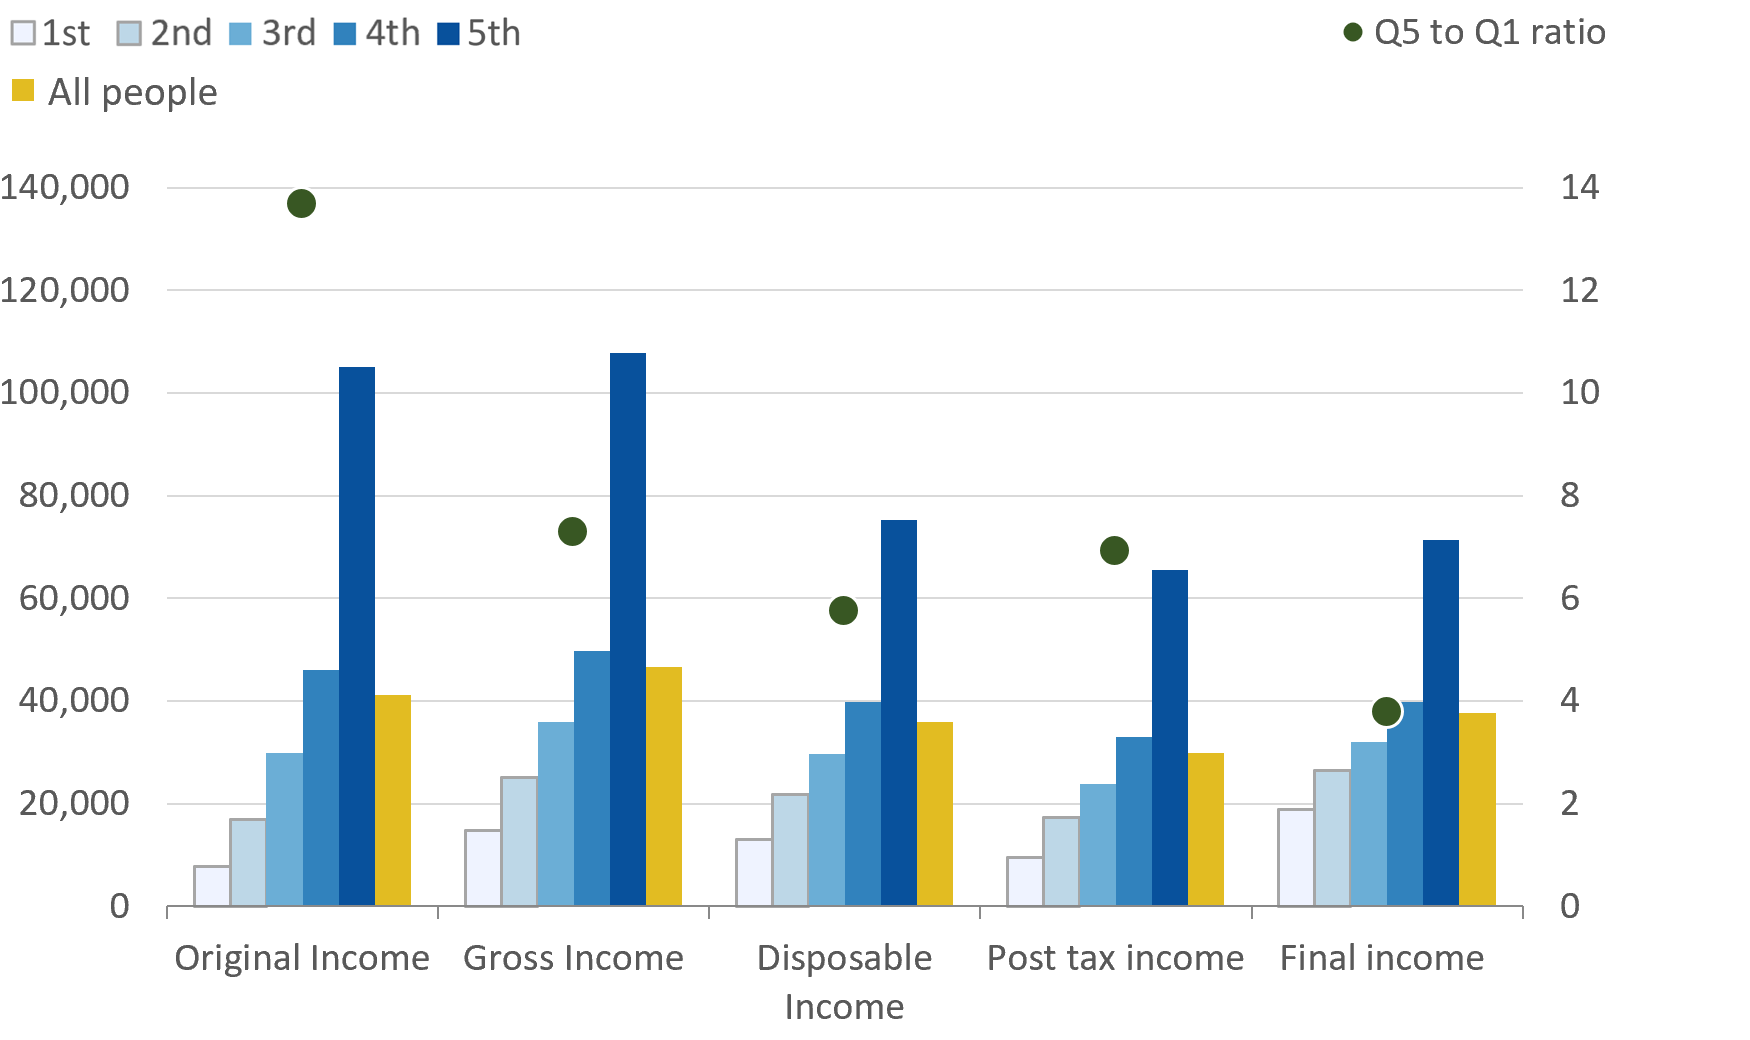 Taxes and benefits lead to household income being shared more equally between people